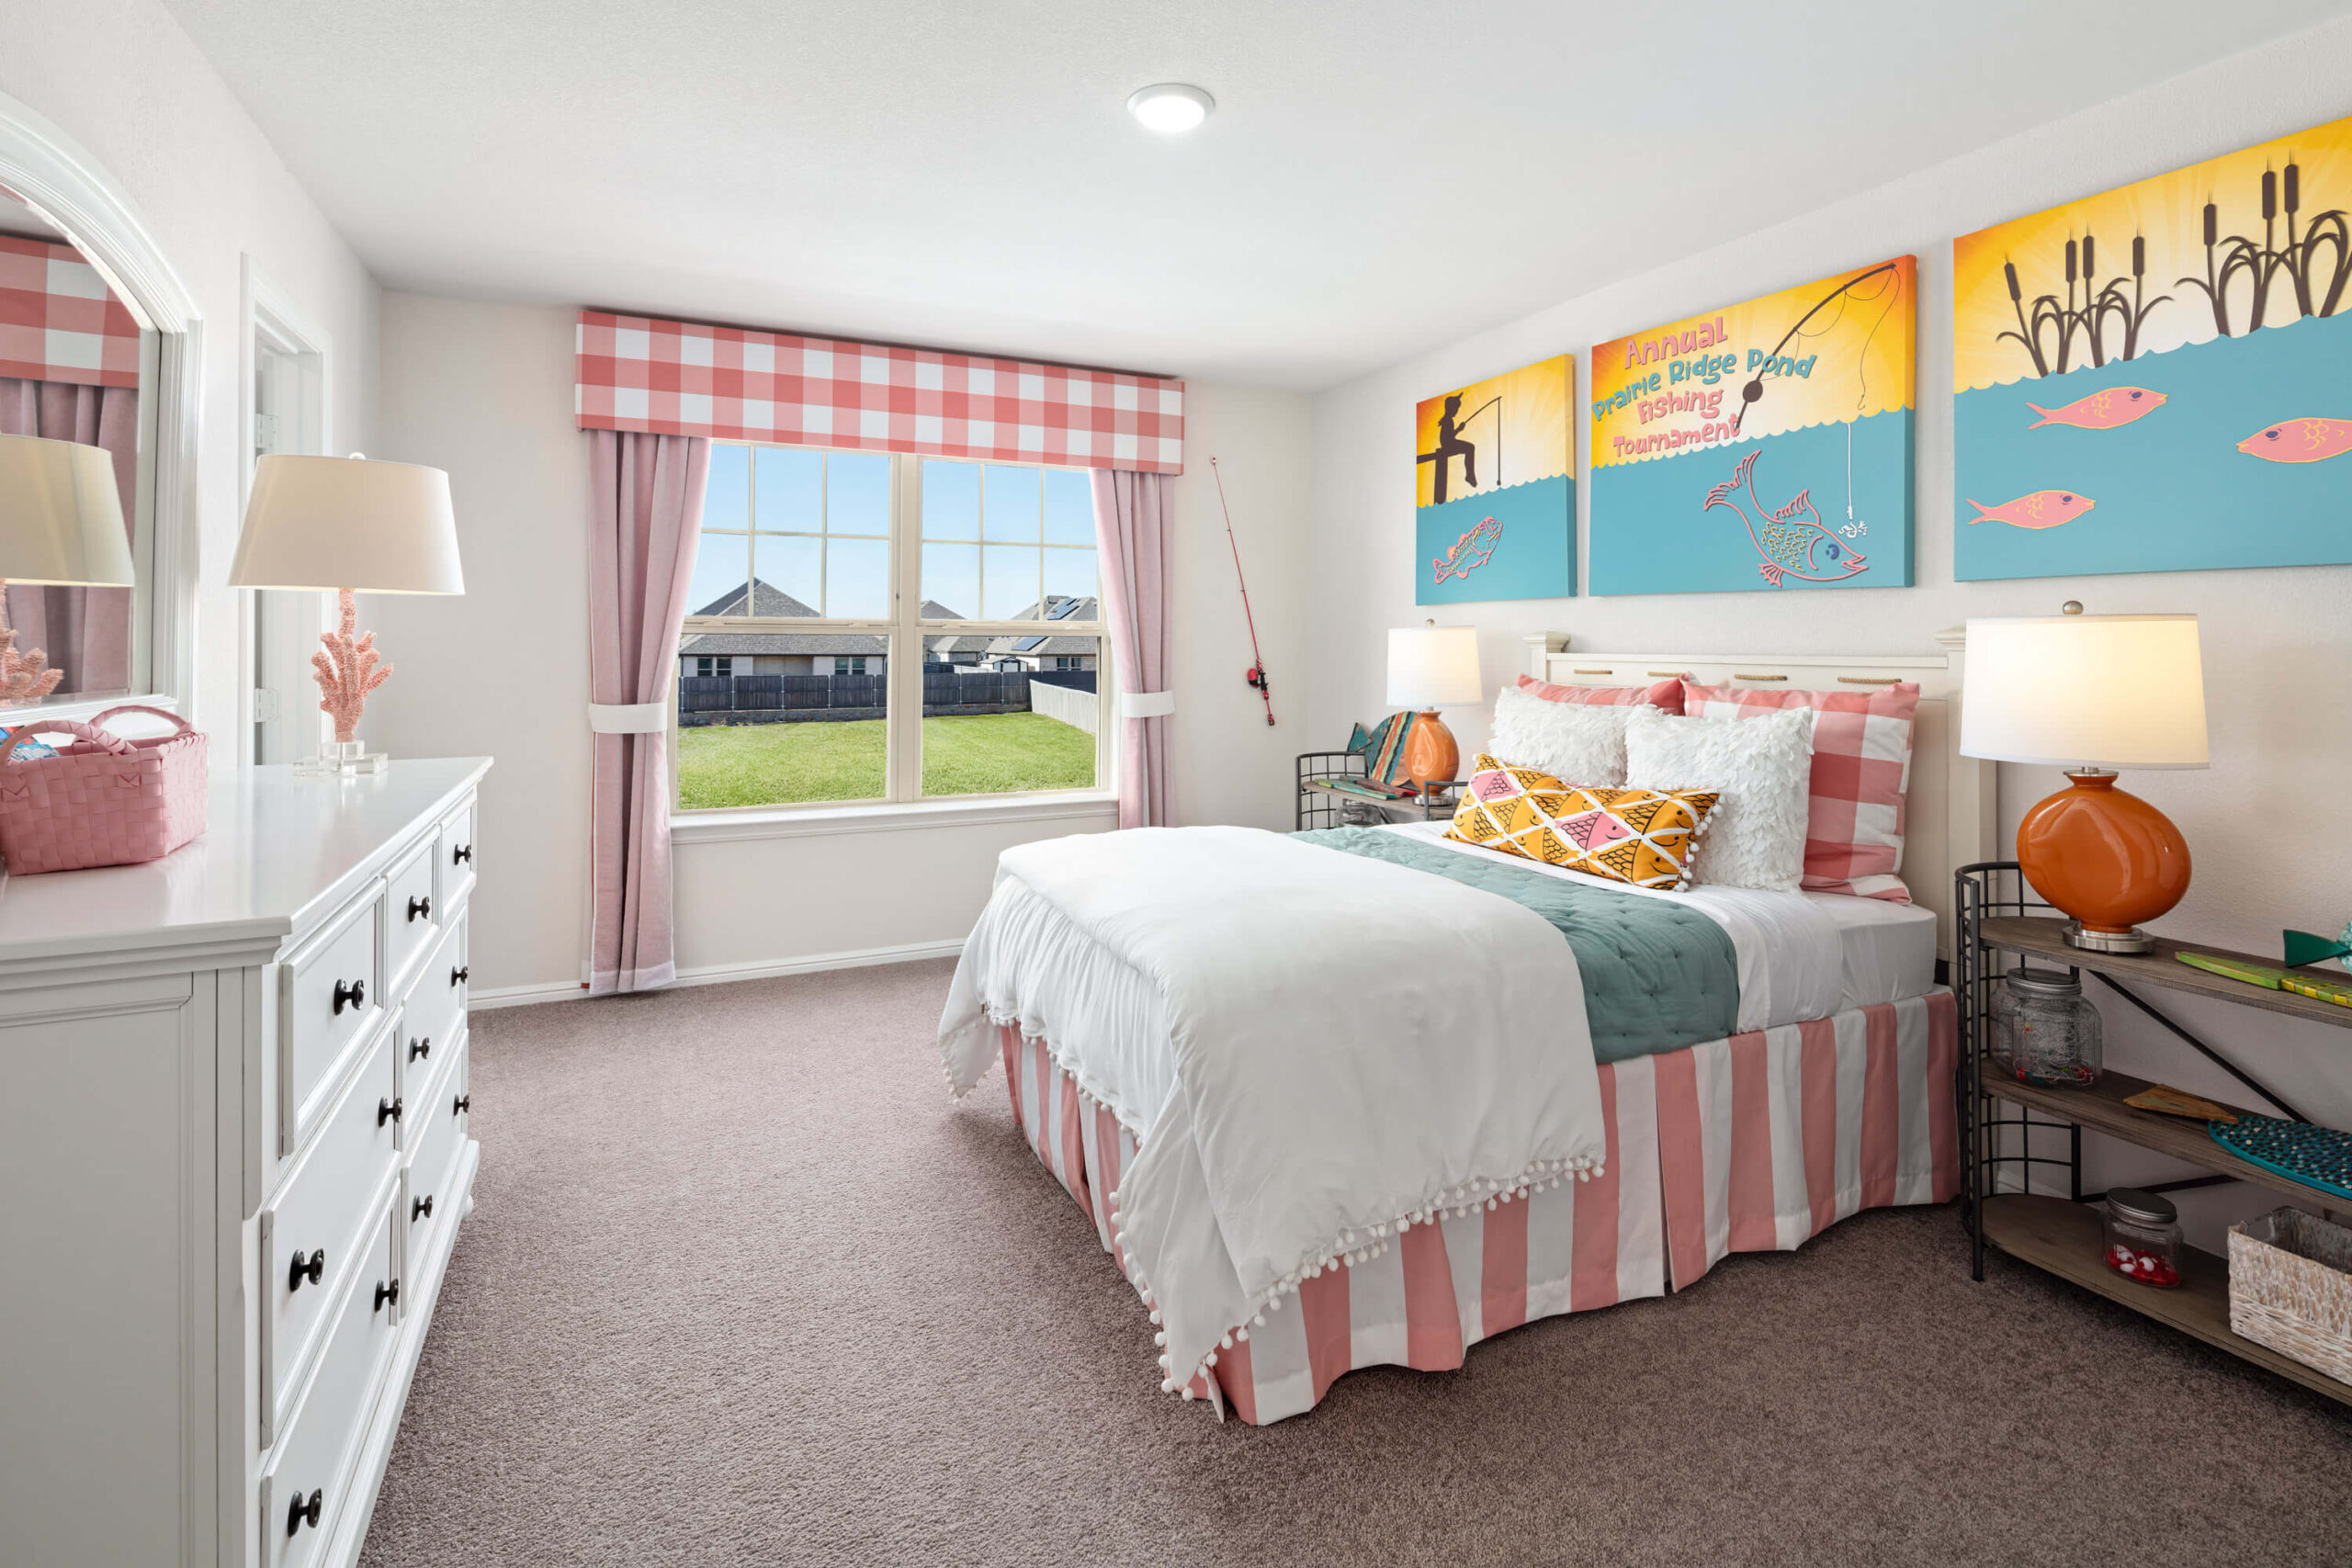 A brightly-lit, colorful bedroom in new homes in Mansfield TX, with a striped bedspread, decorative pillows, artwork on the wall, and a view of the outside through the window.